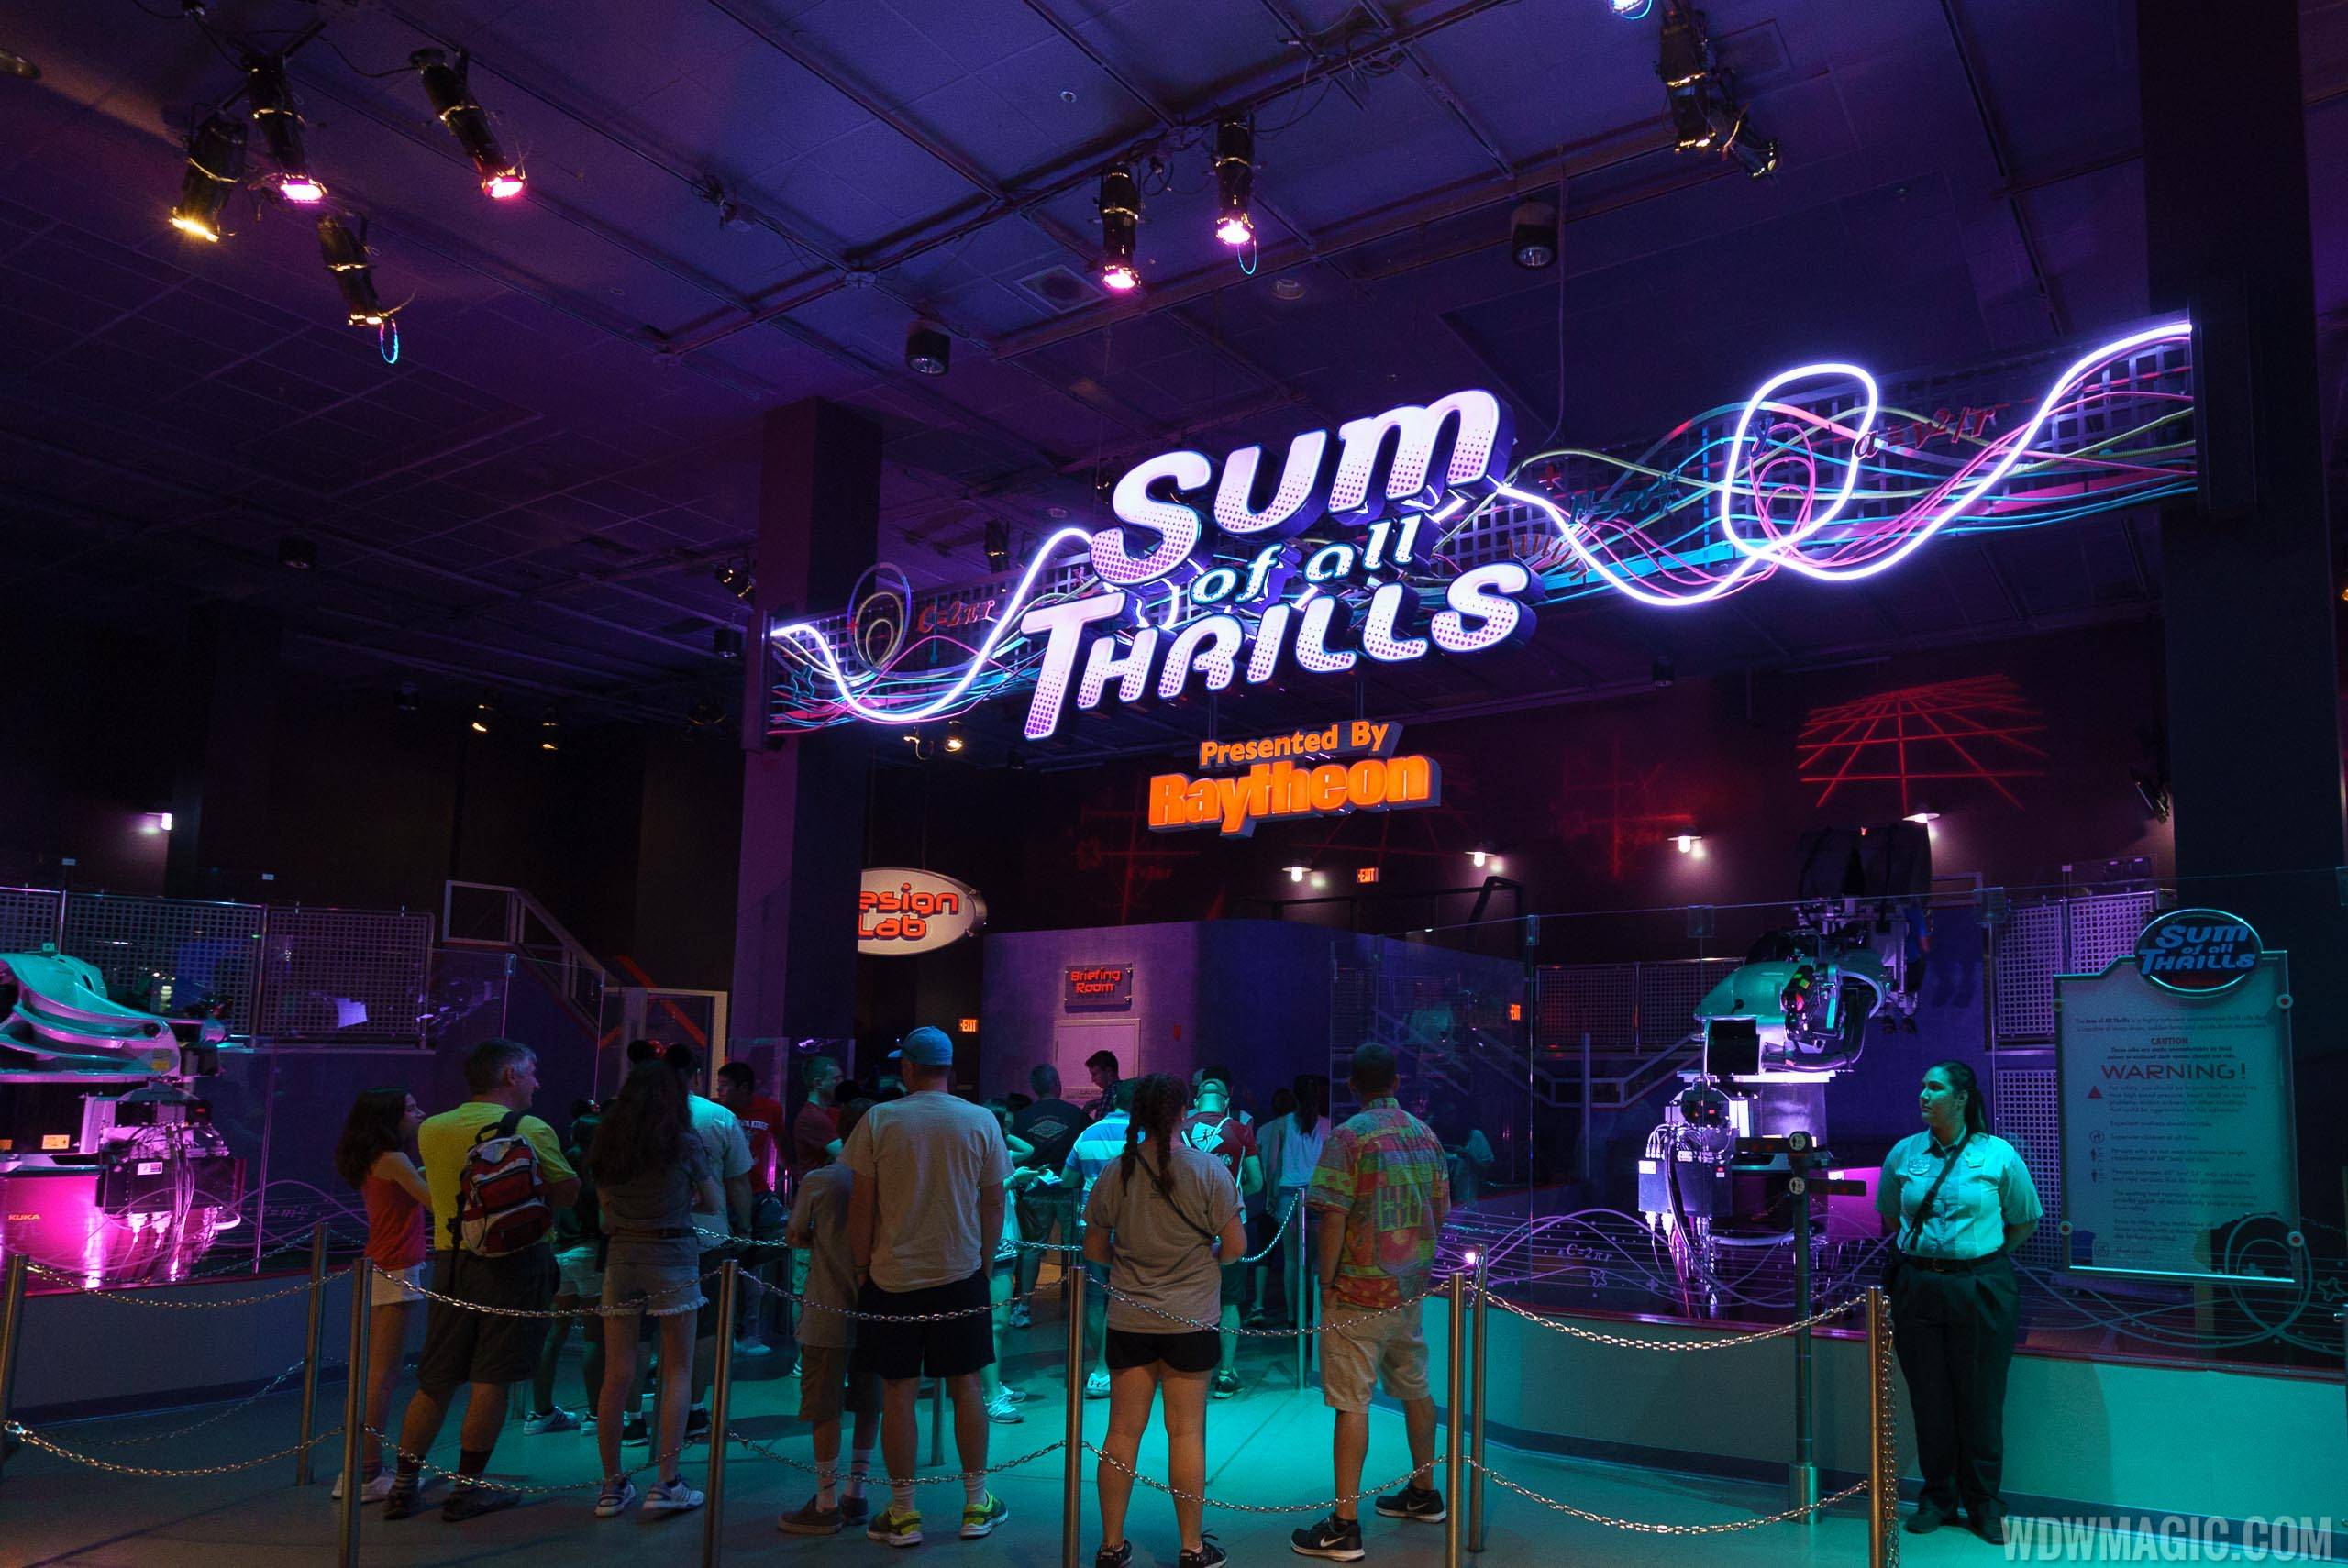 Epcot's The Sum of All Thrills closed for refurbishment